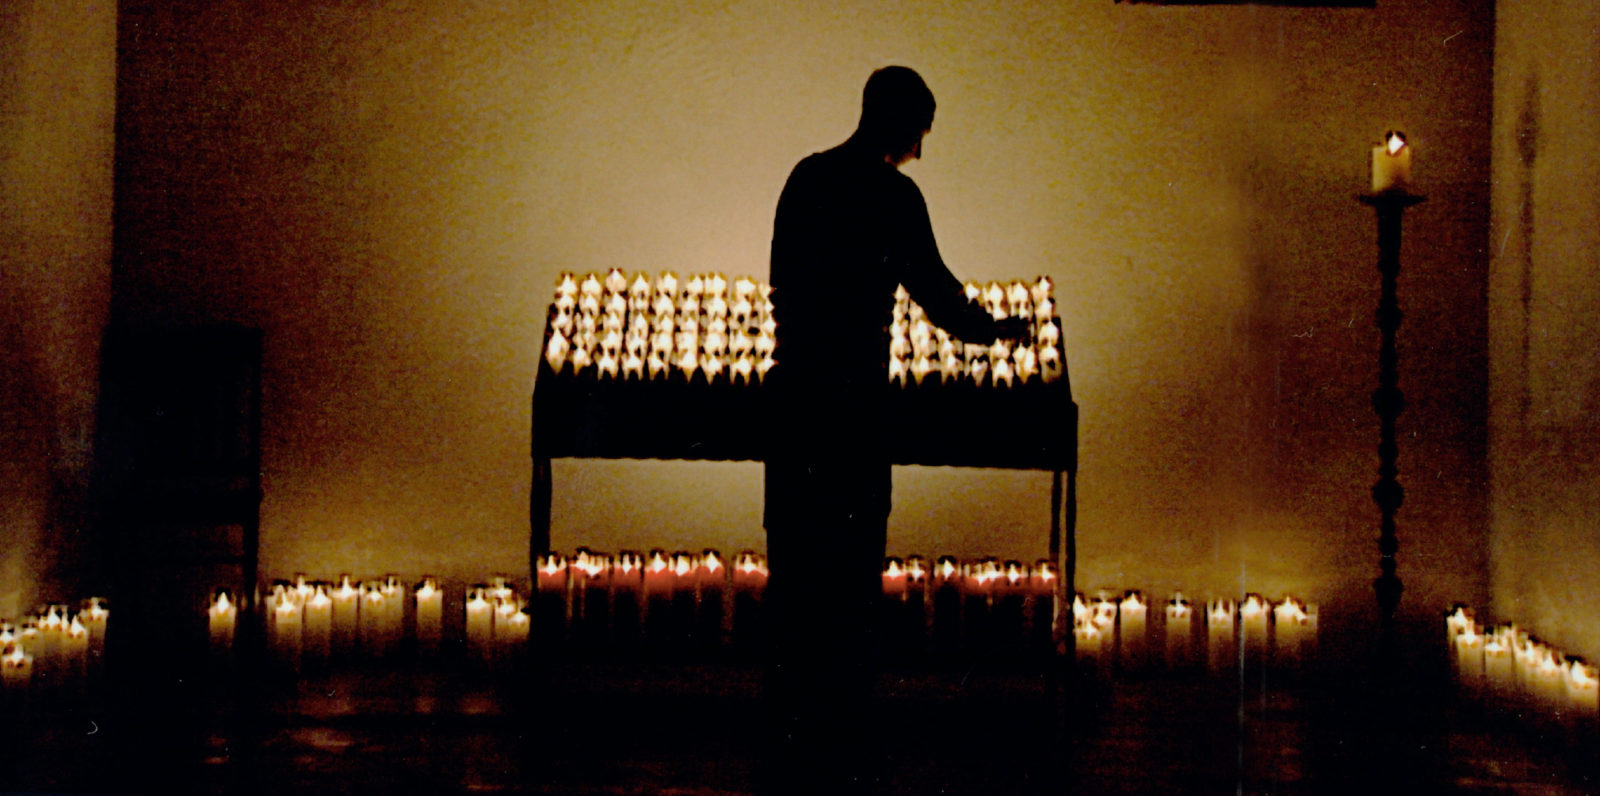 Man lighting candles in a darkened room